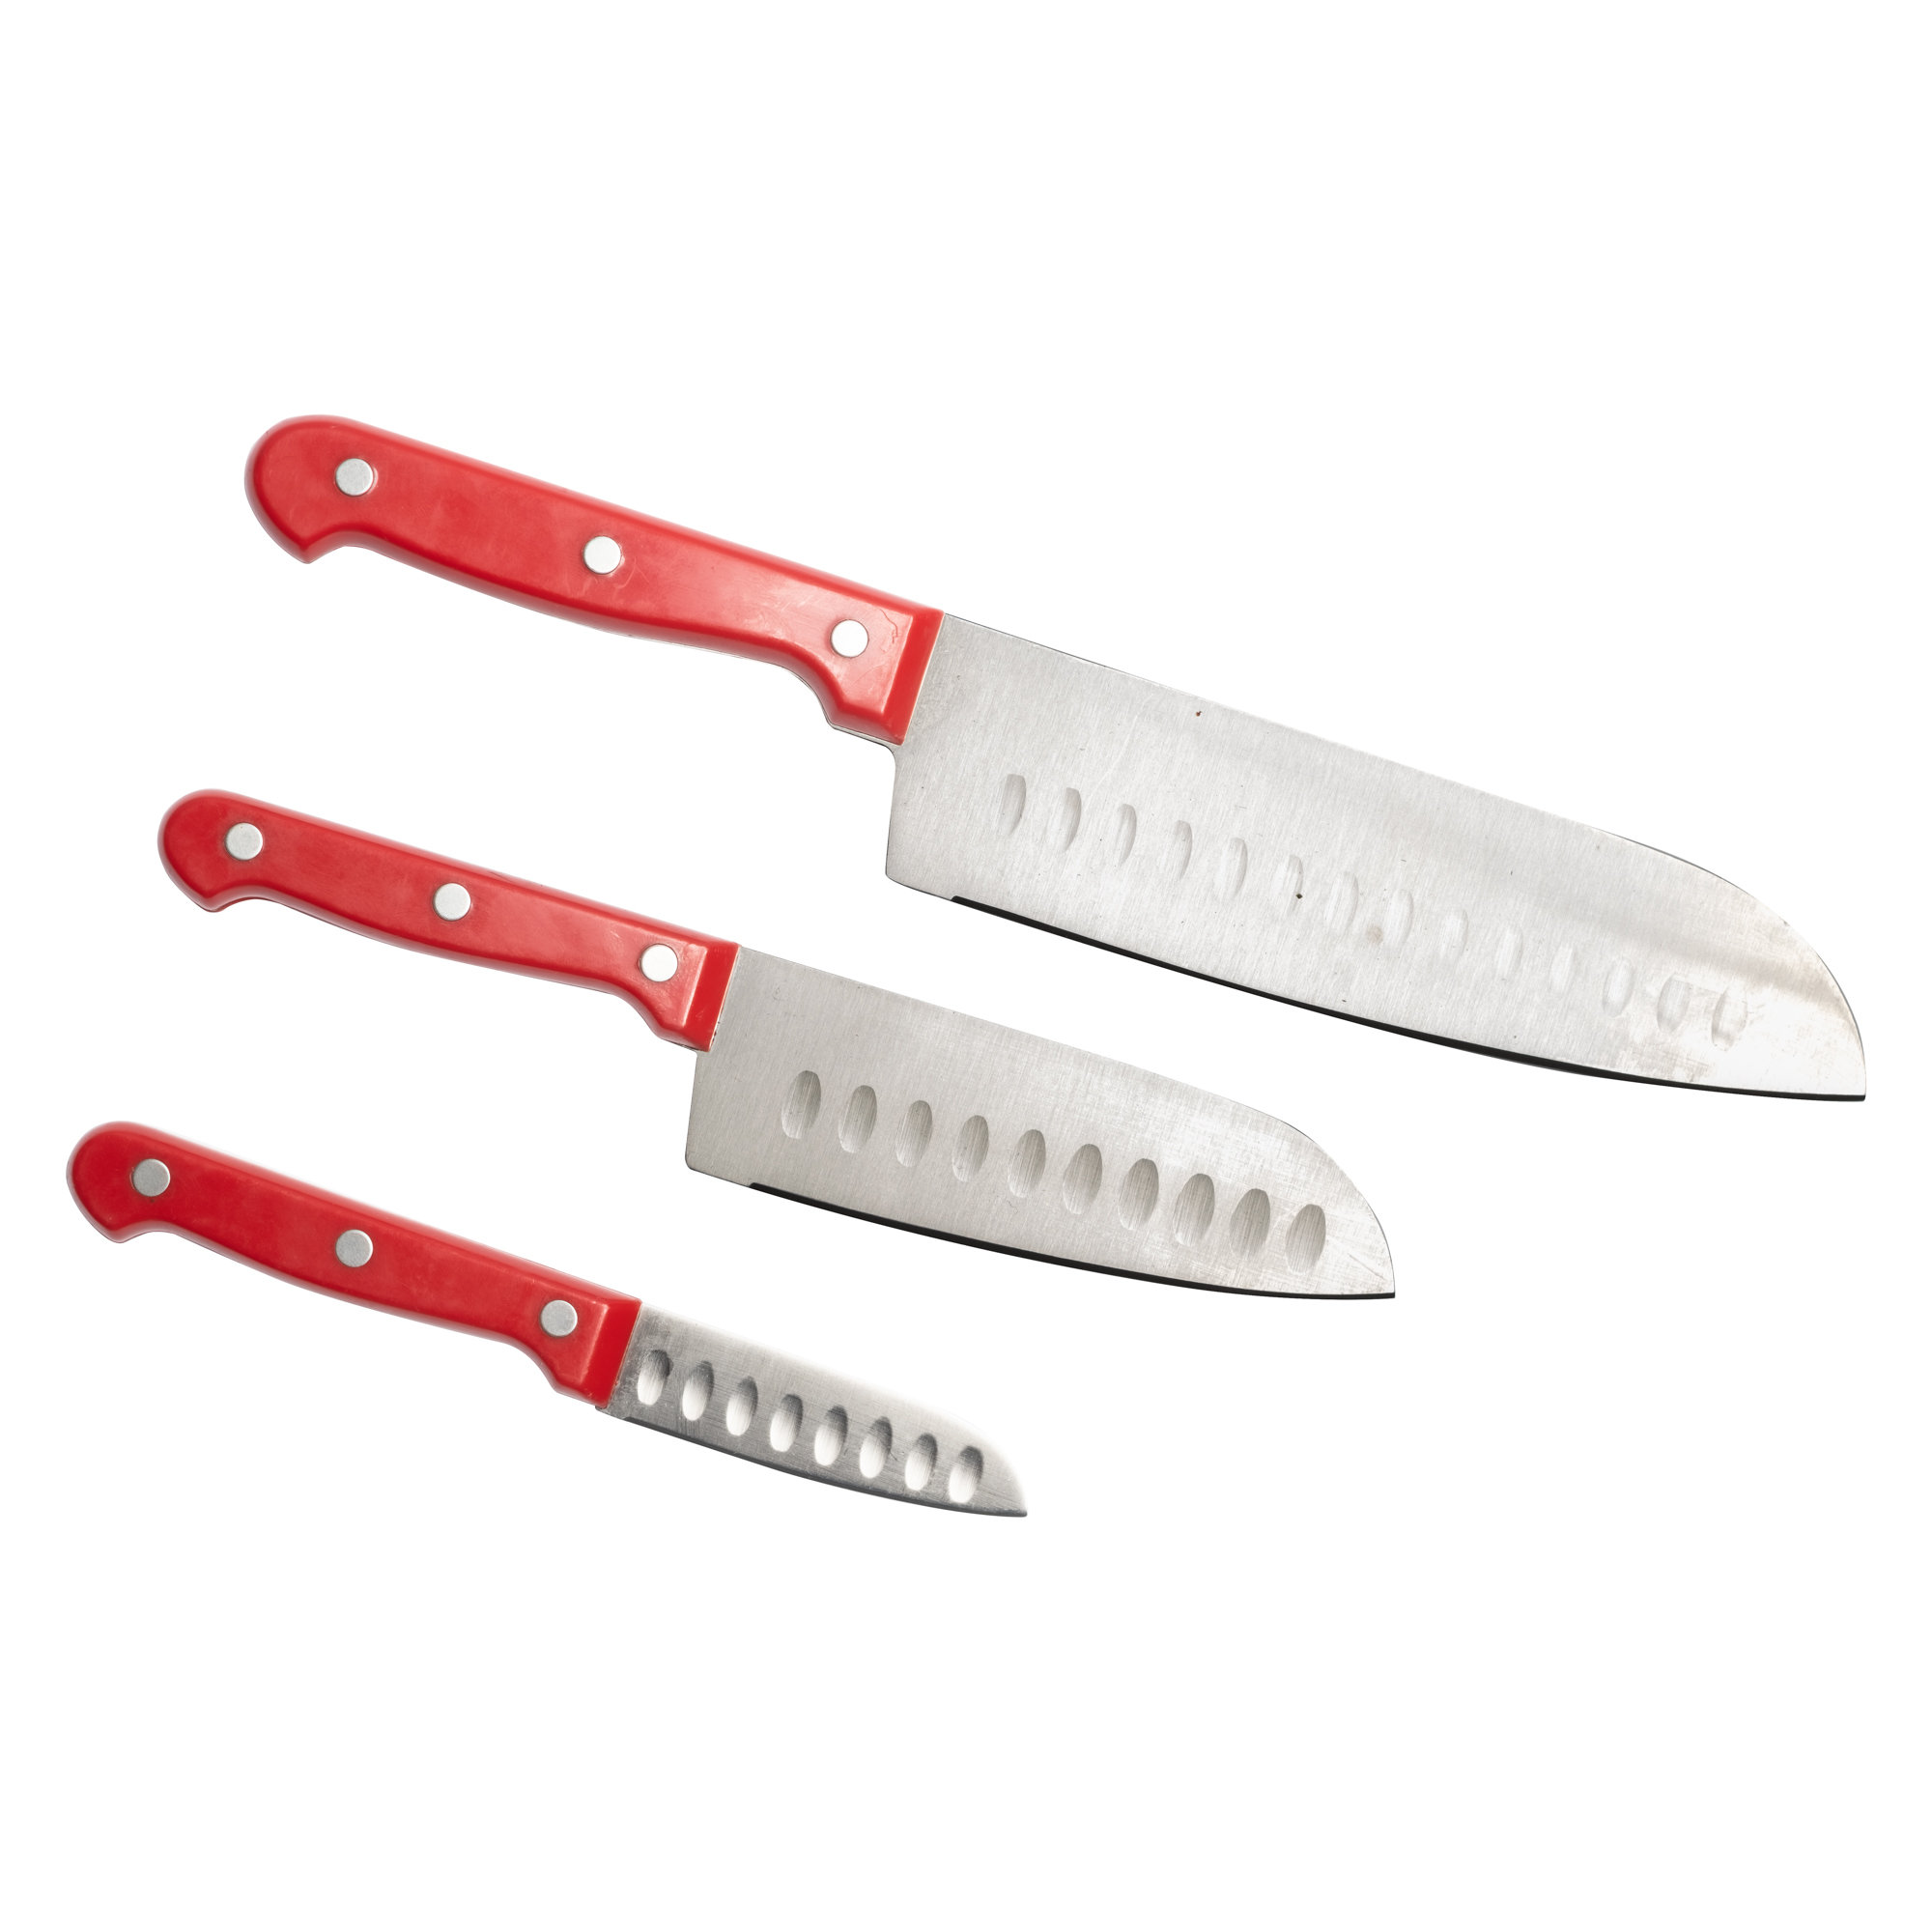 Dura Living EcoCut 4-Piece Steak Knife Set - High Carbon Micro Serrated Stainless Steel Blades, Eco-Friendly Handles - Blue